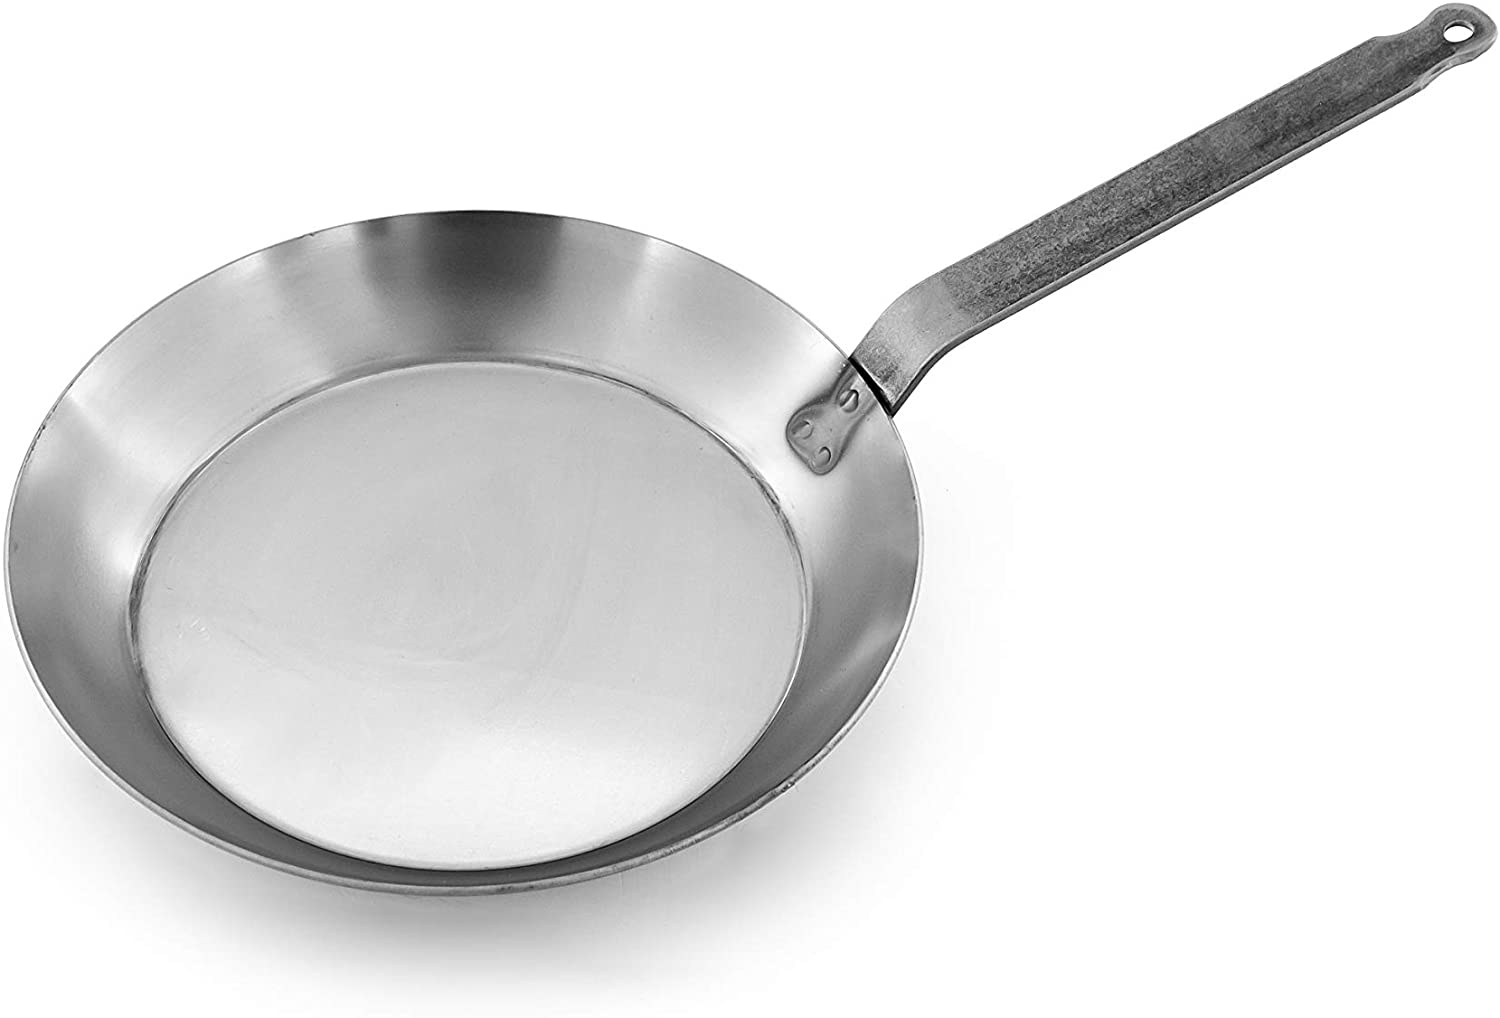 Matfer Bourgeat Nonstick Stainless Steel Skillet, 11-Inch